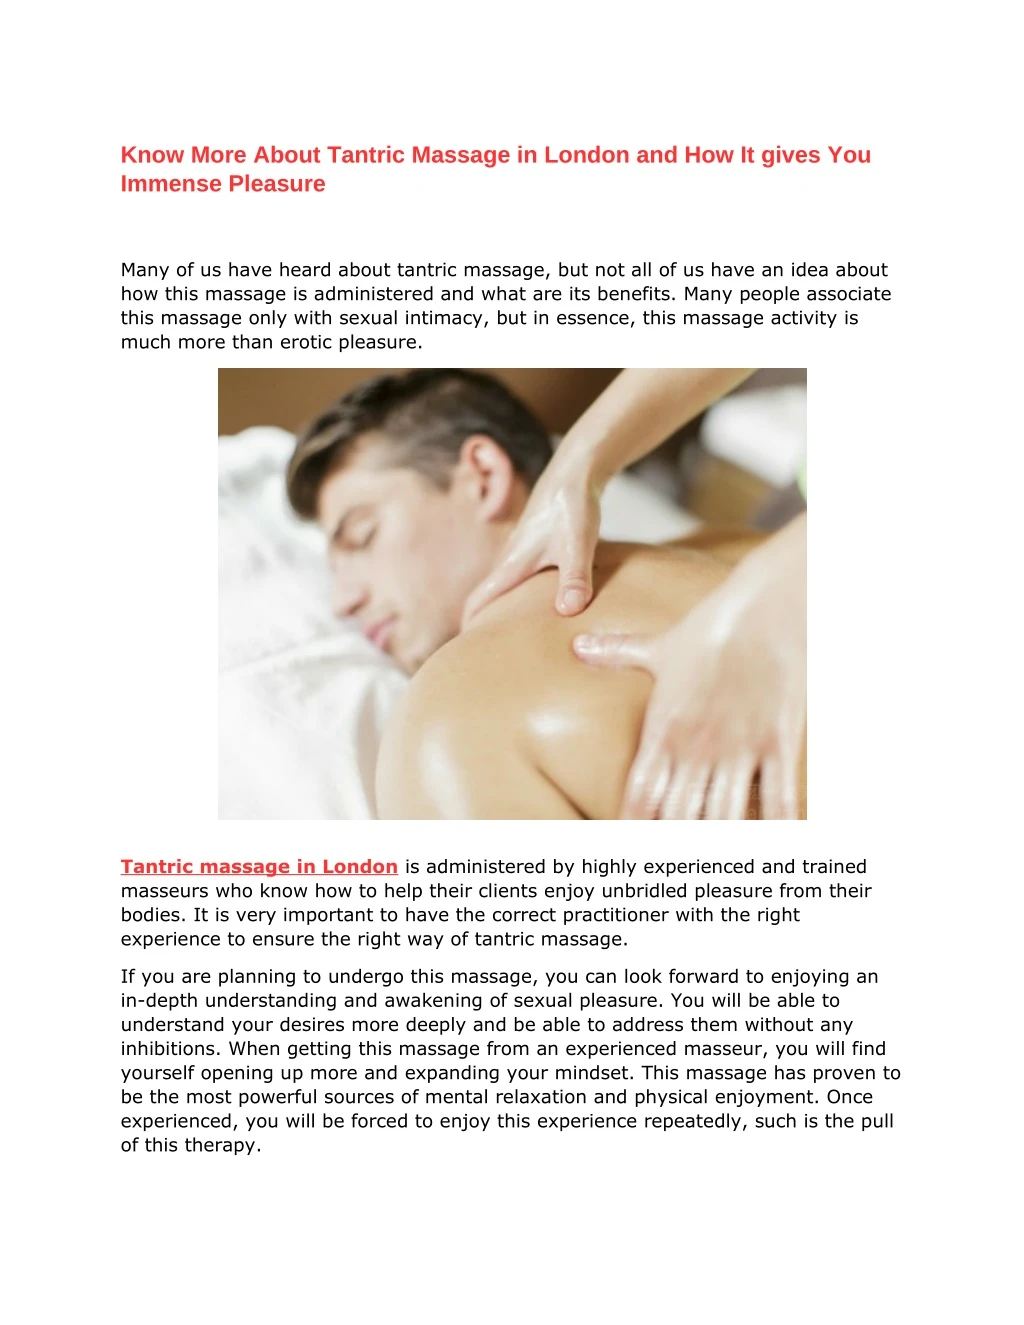 know more about tantric massage in london